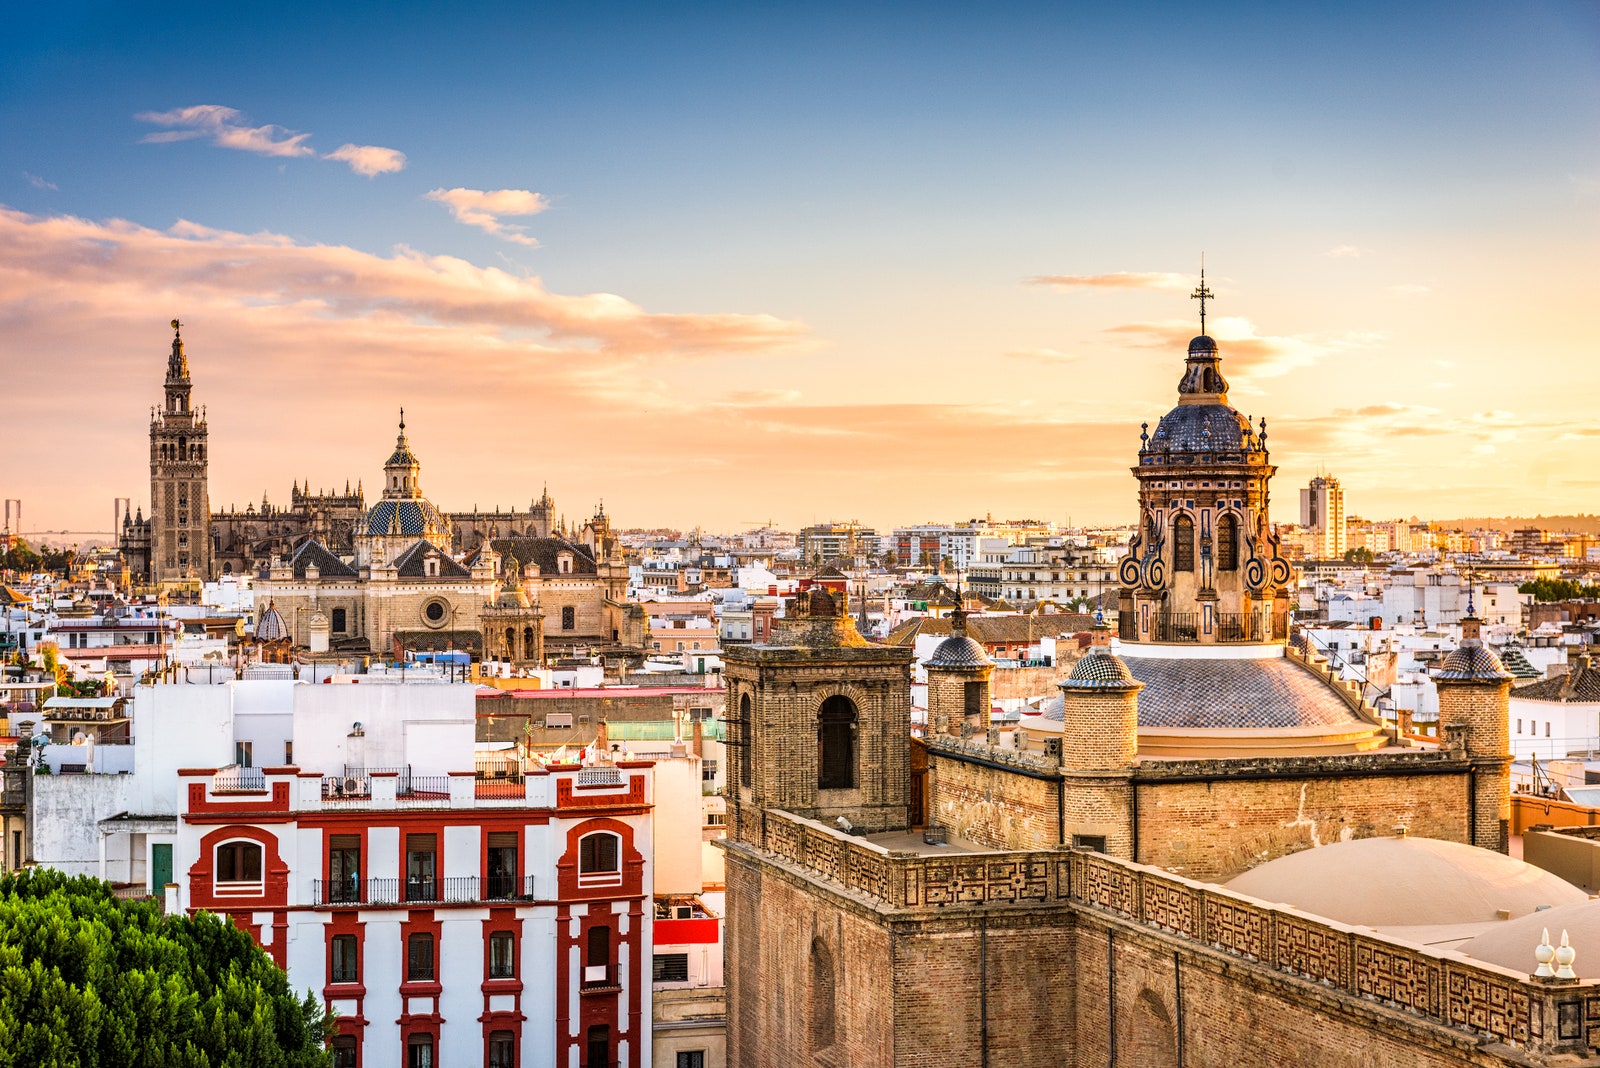 Worldwide Adventure Quiz 🌍: What Does Your Future Look Like? Seville, Spain